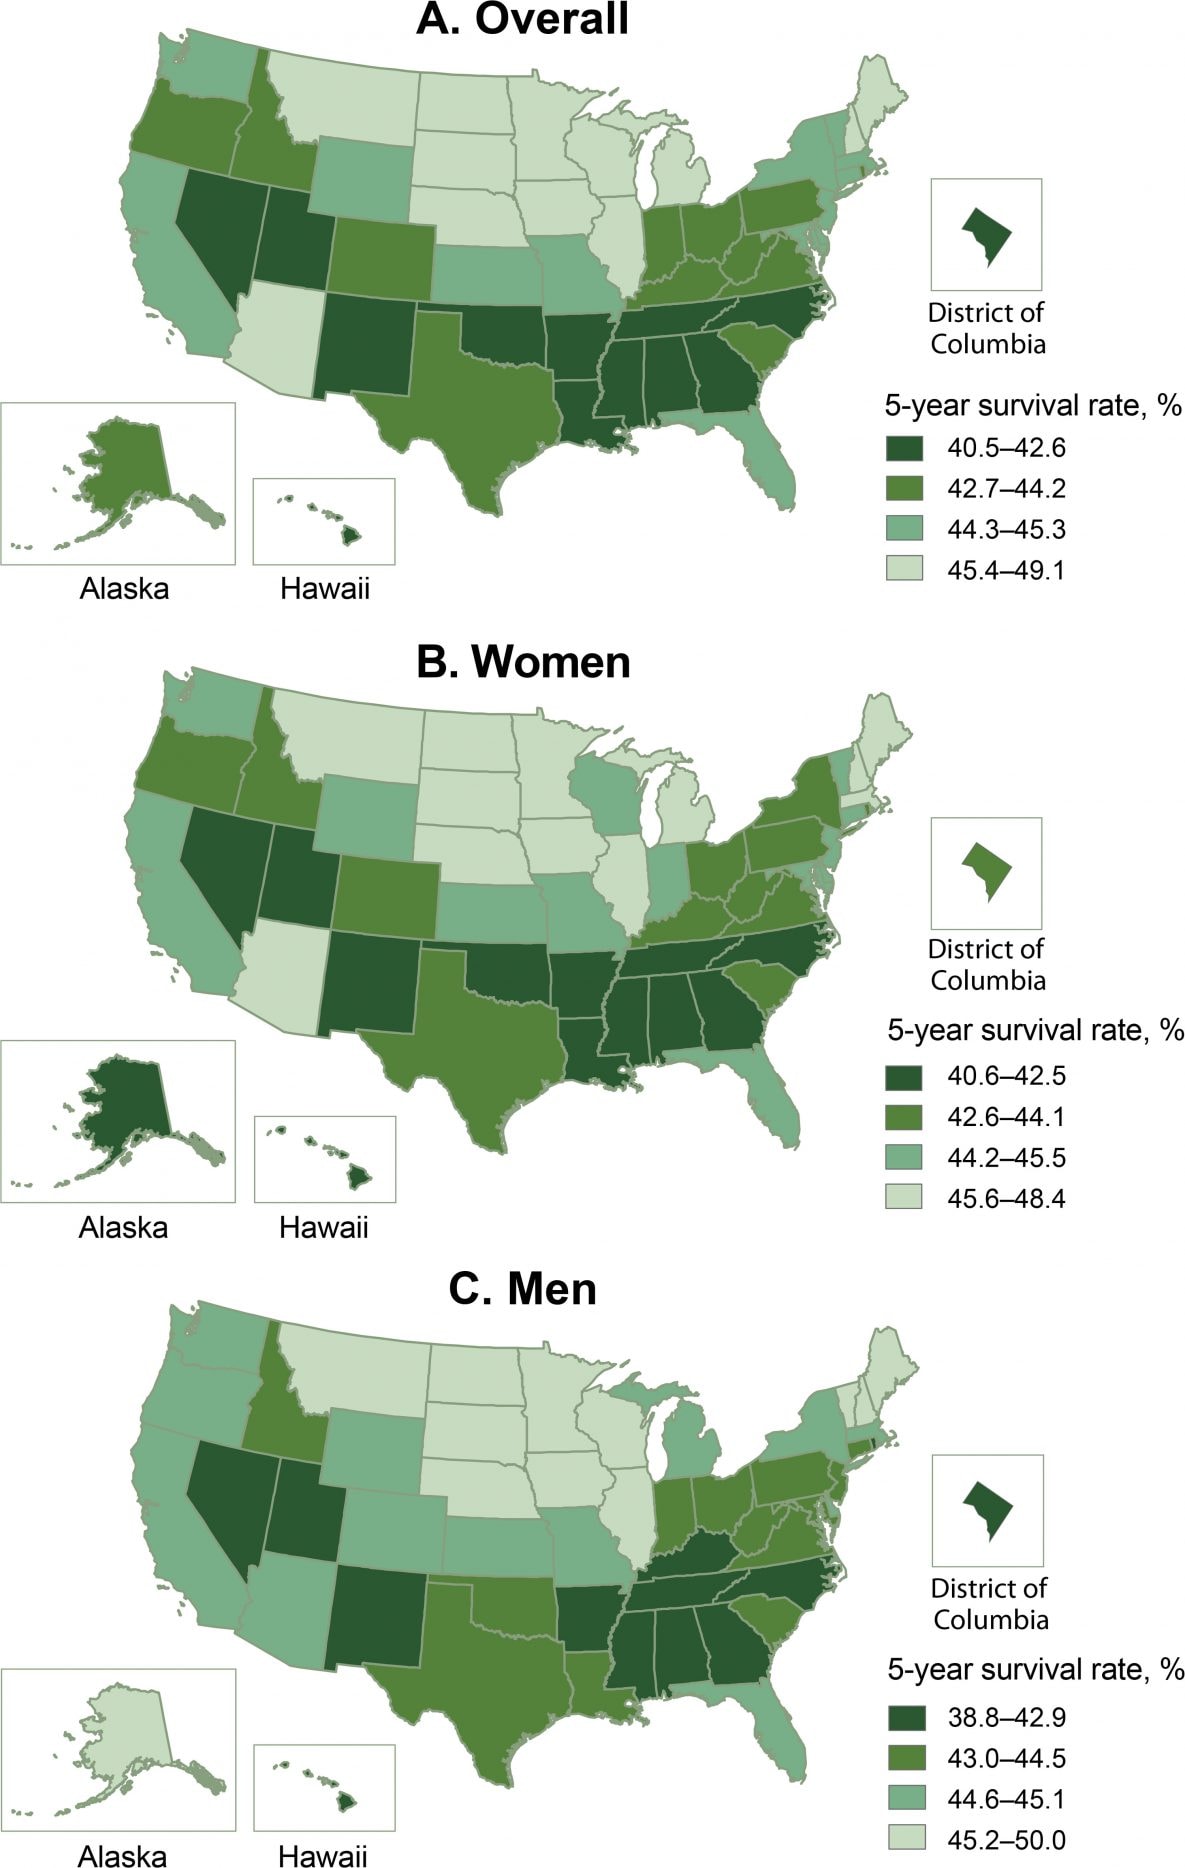 Adjusted 5-year survival after acute ischemic stroke among Medicare fee-for-service beneficiaries, Medicare cohort 2008–2017. Map A shows the adjusted 5-year survival after acute ischemic stroke among all Medicare fee-for-service beneficiaries. Map B shows the adjusted 5-year survival among women, and Map C shows the adjusted 5-year survival among men.